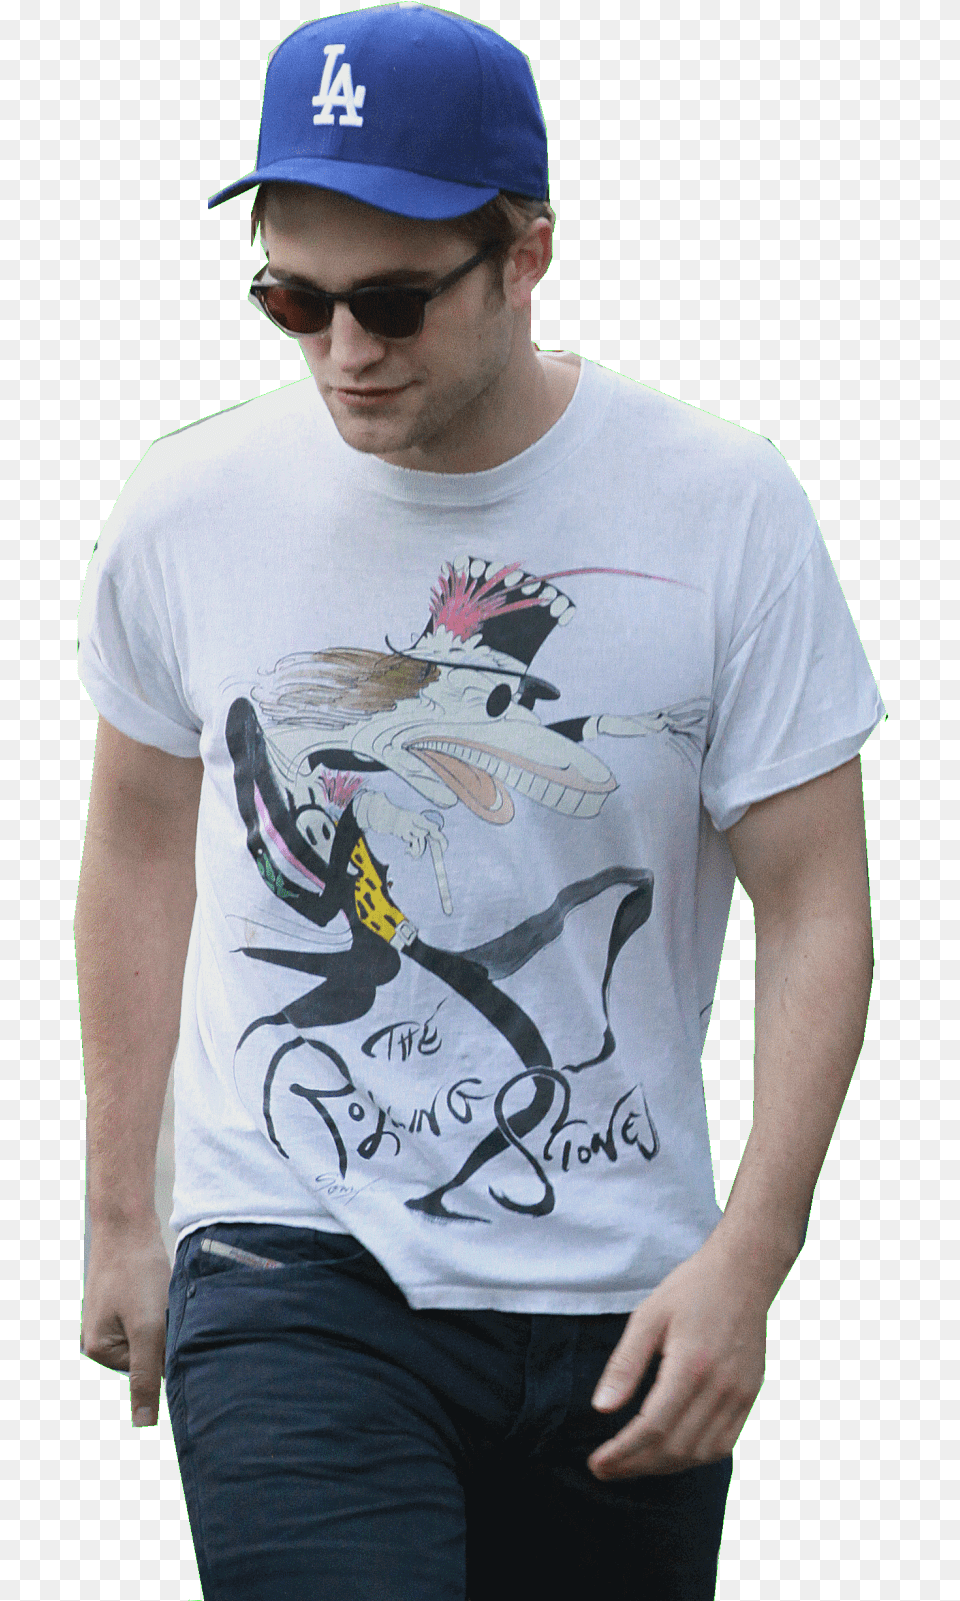 2011 07 01 Gerald Scarfe Rolling Stones 1994 Voodoo Lounge Shirt, Accessories, Sunglasses, T-shirt, Hat Free Png